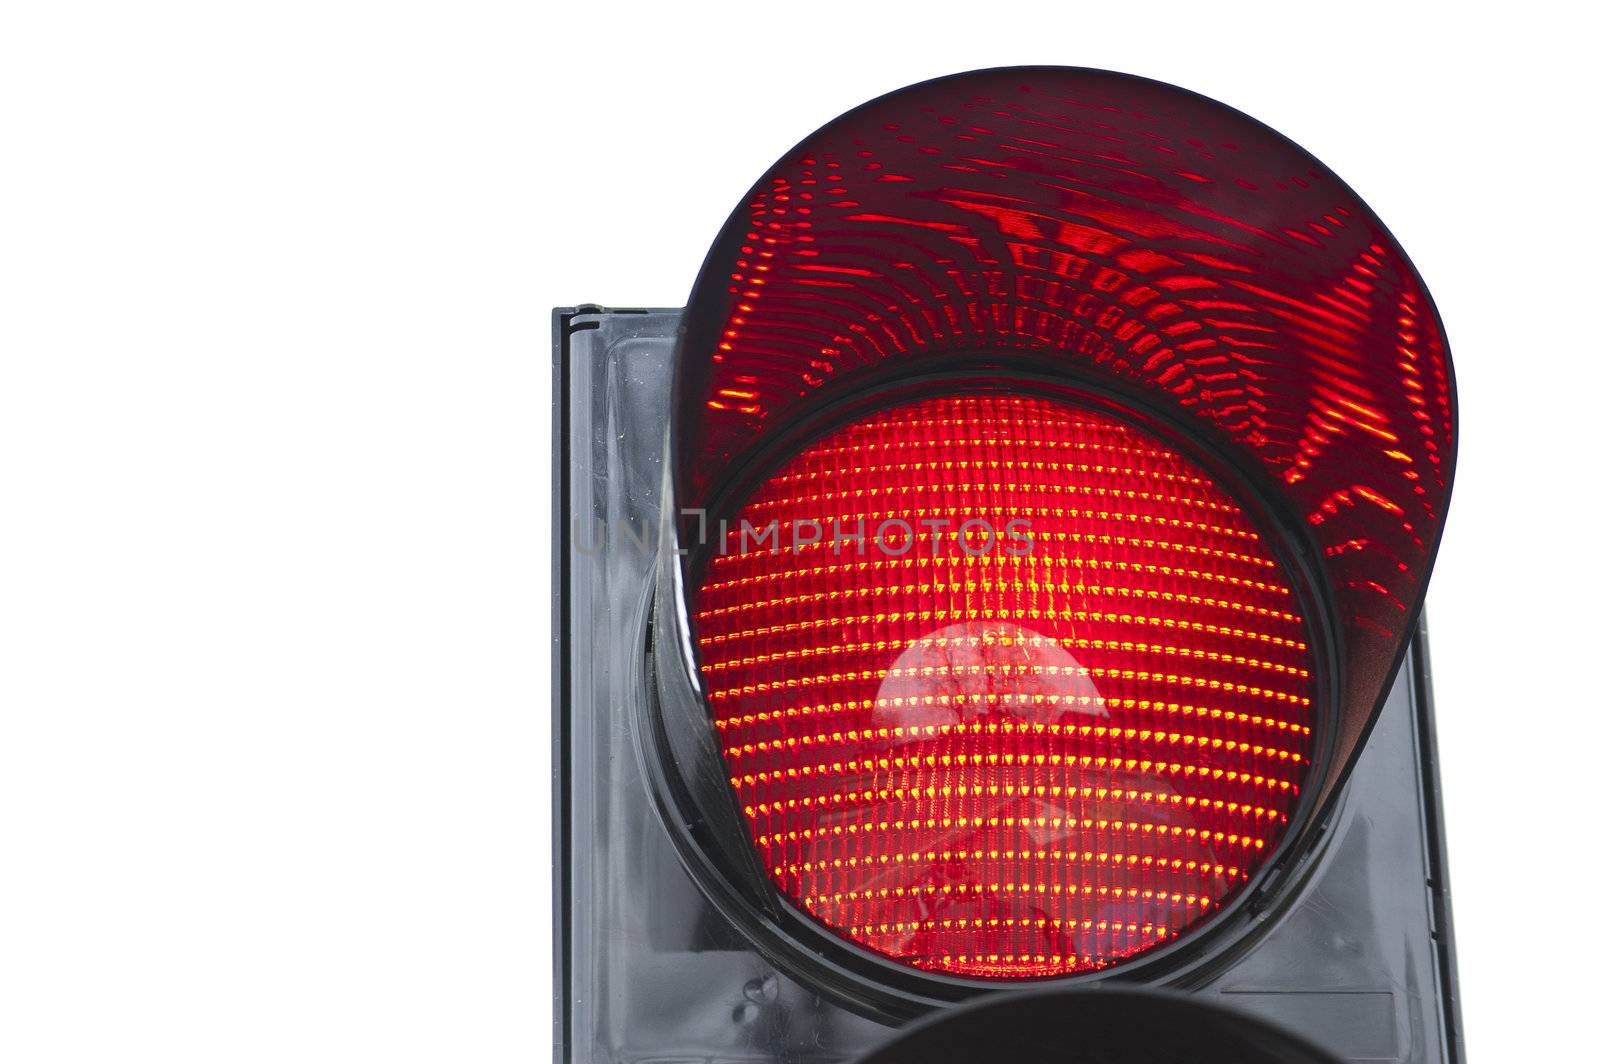 One of traffic light signal shows red light